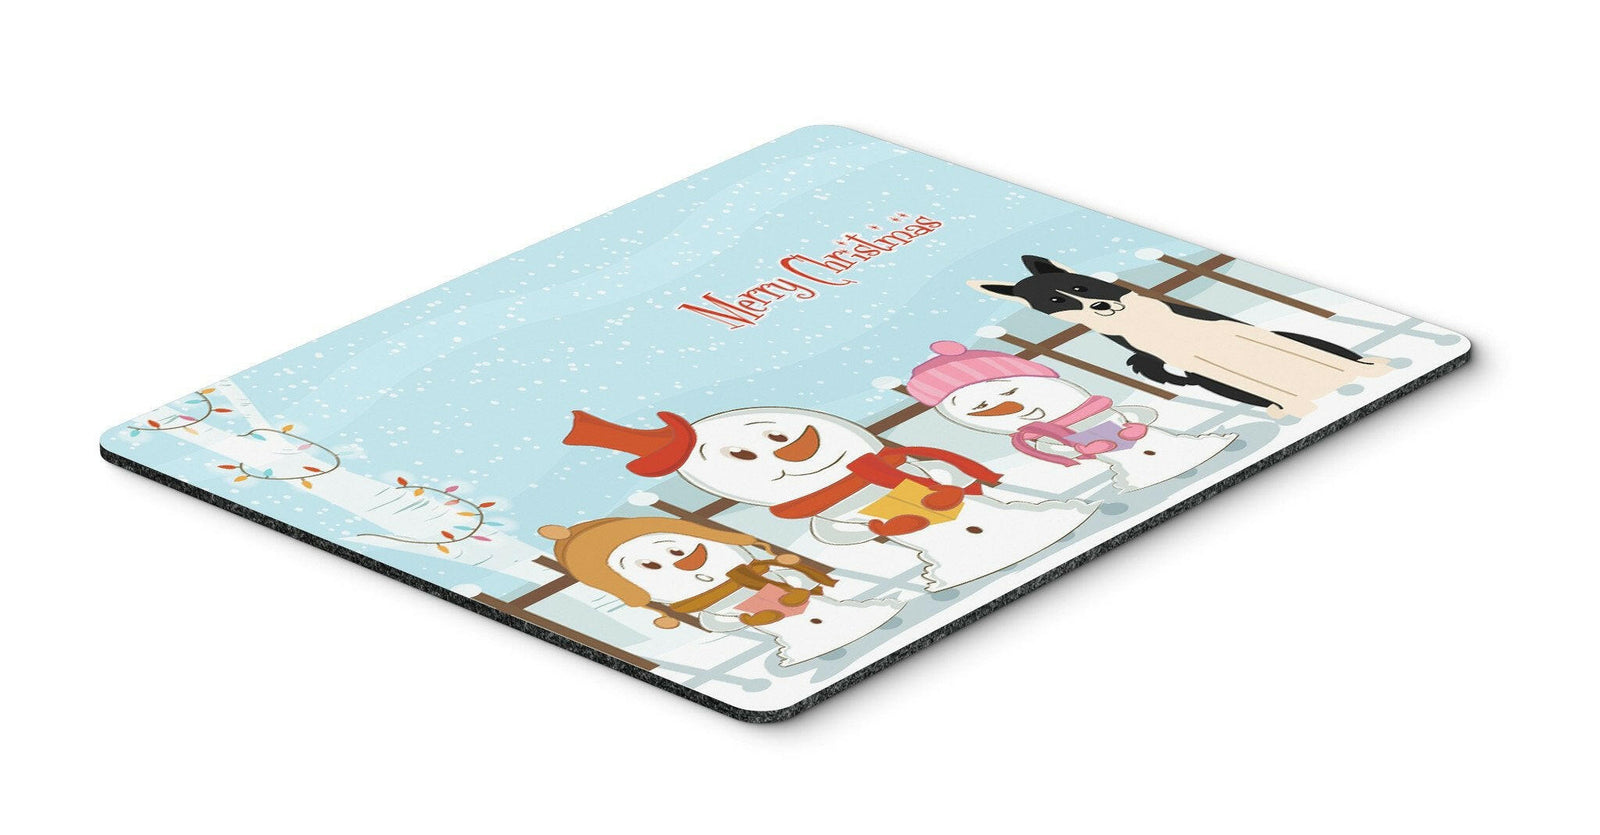 Merry Christmas Carolers Russo-European Laika Spitz Mouse Pad, Hot Pad or Trivet BB2360MP by Caroline's Treasures